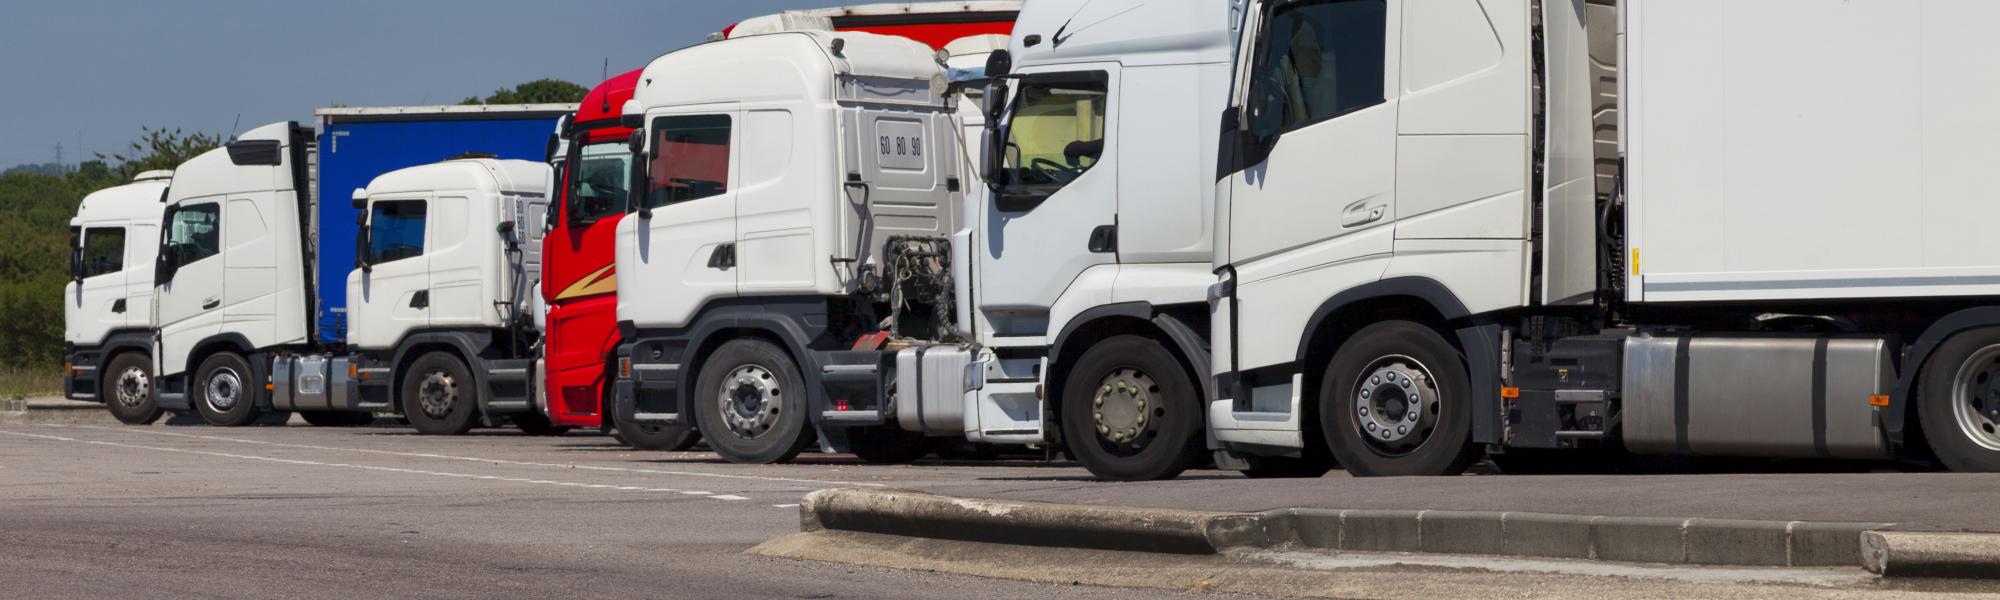 Promoting safe parking areas with the European Truck Parking Award